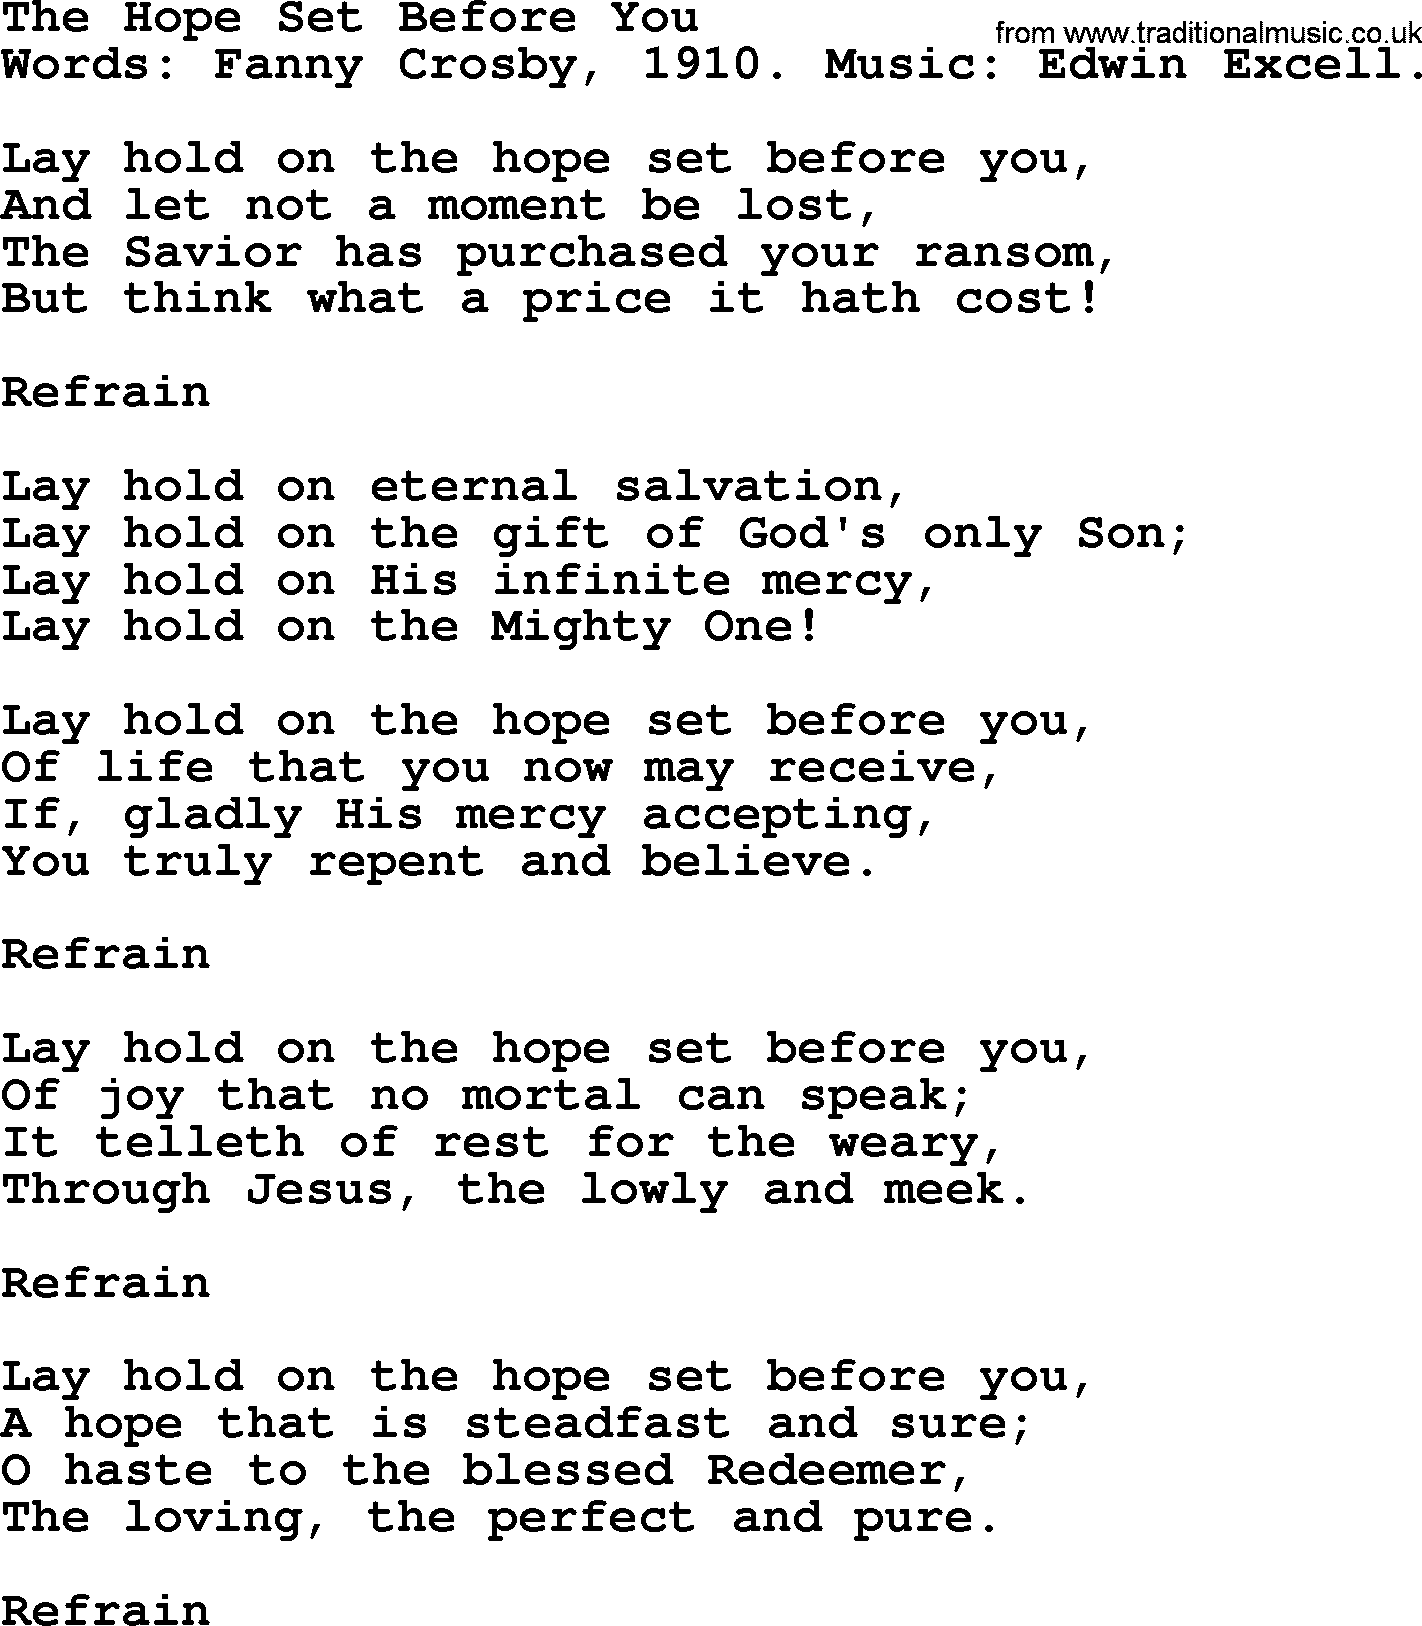 Fanny Crosby song: The Hope Set Before You, lyrics